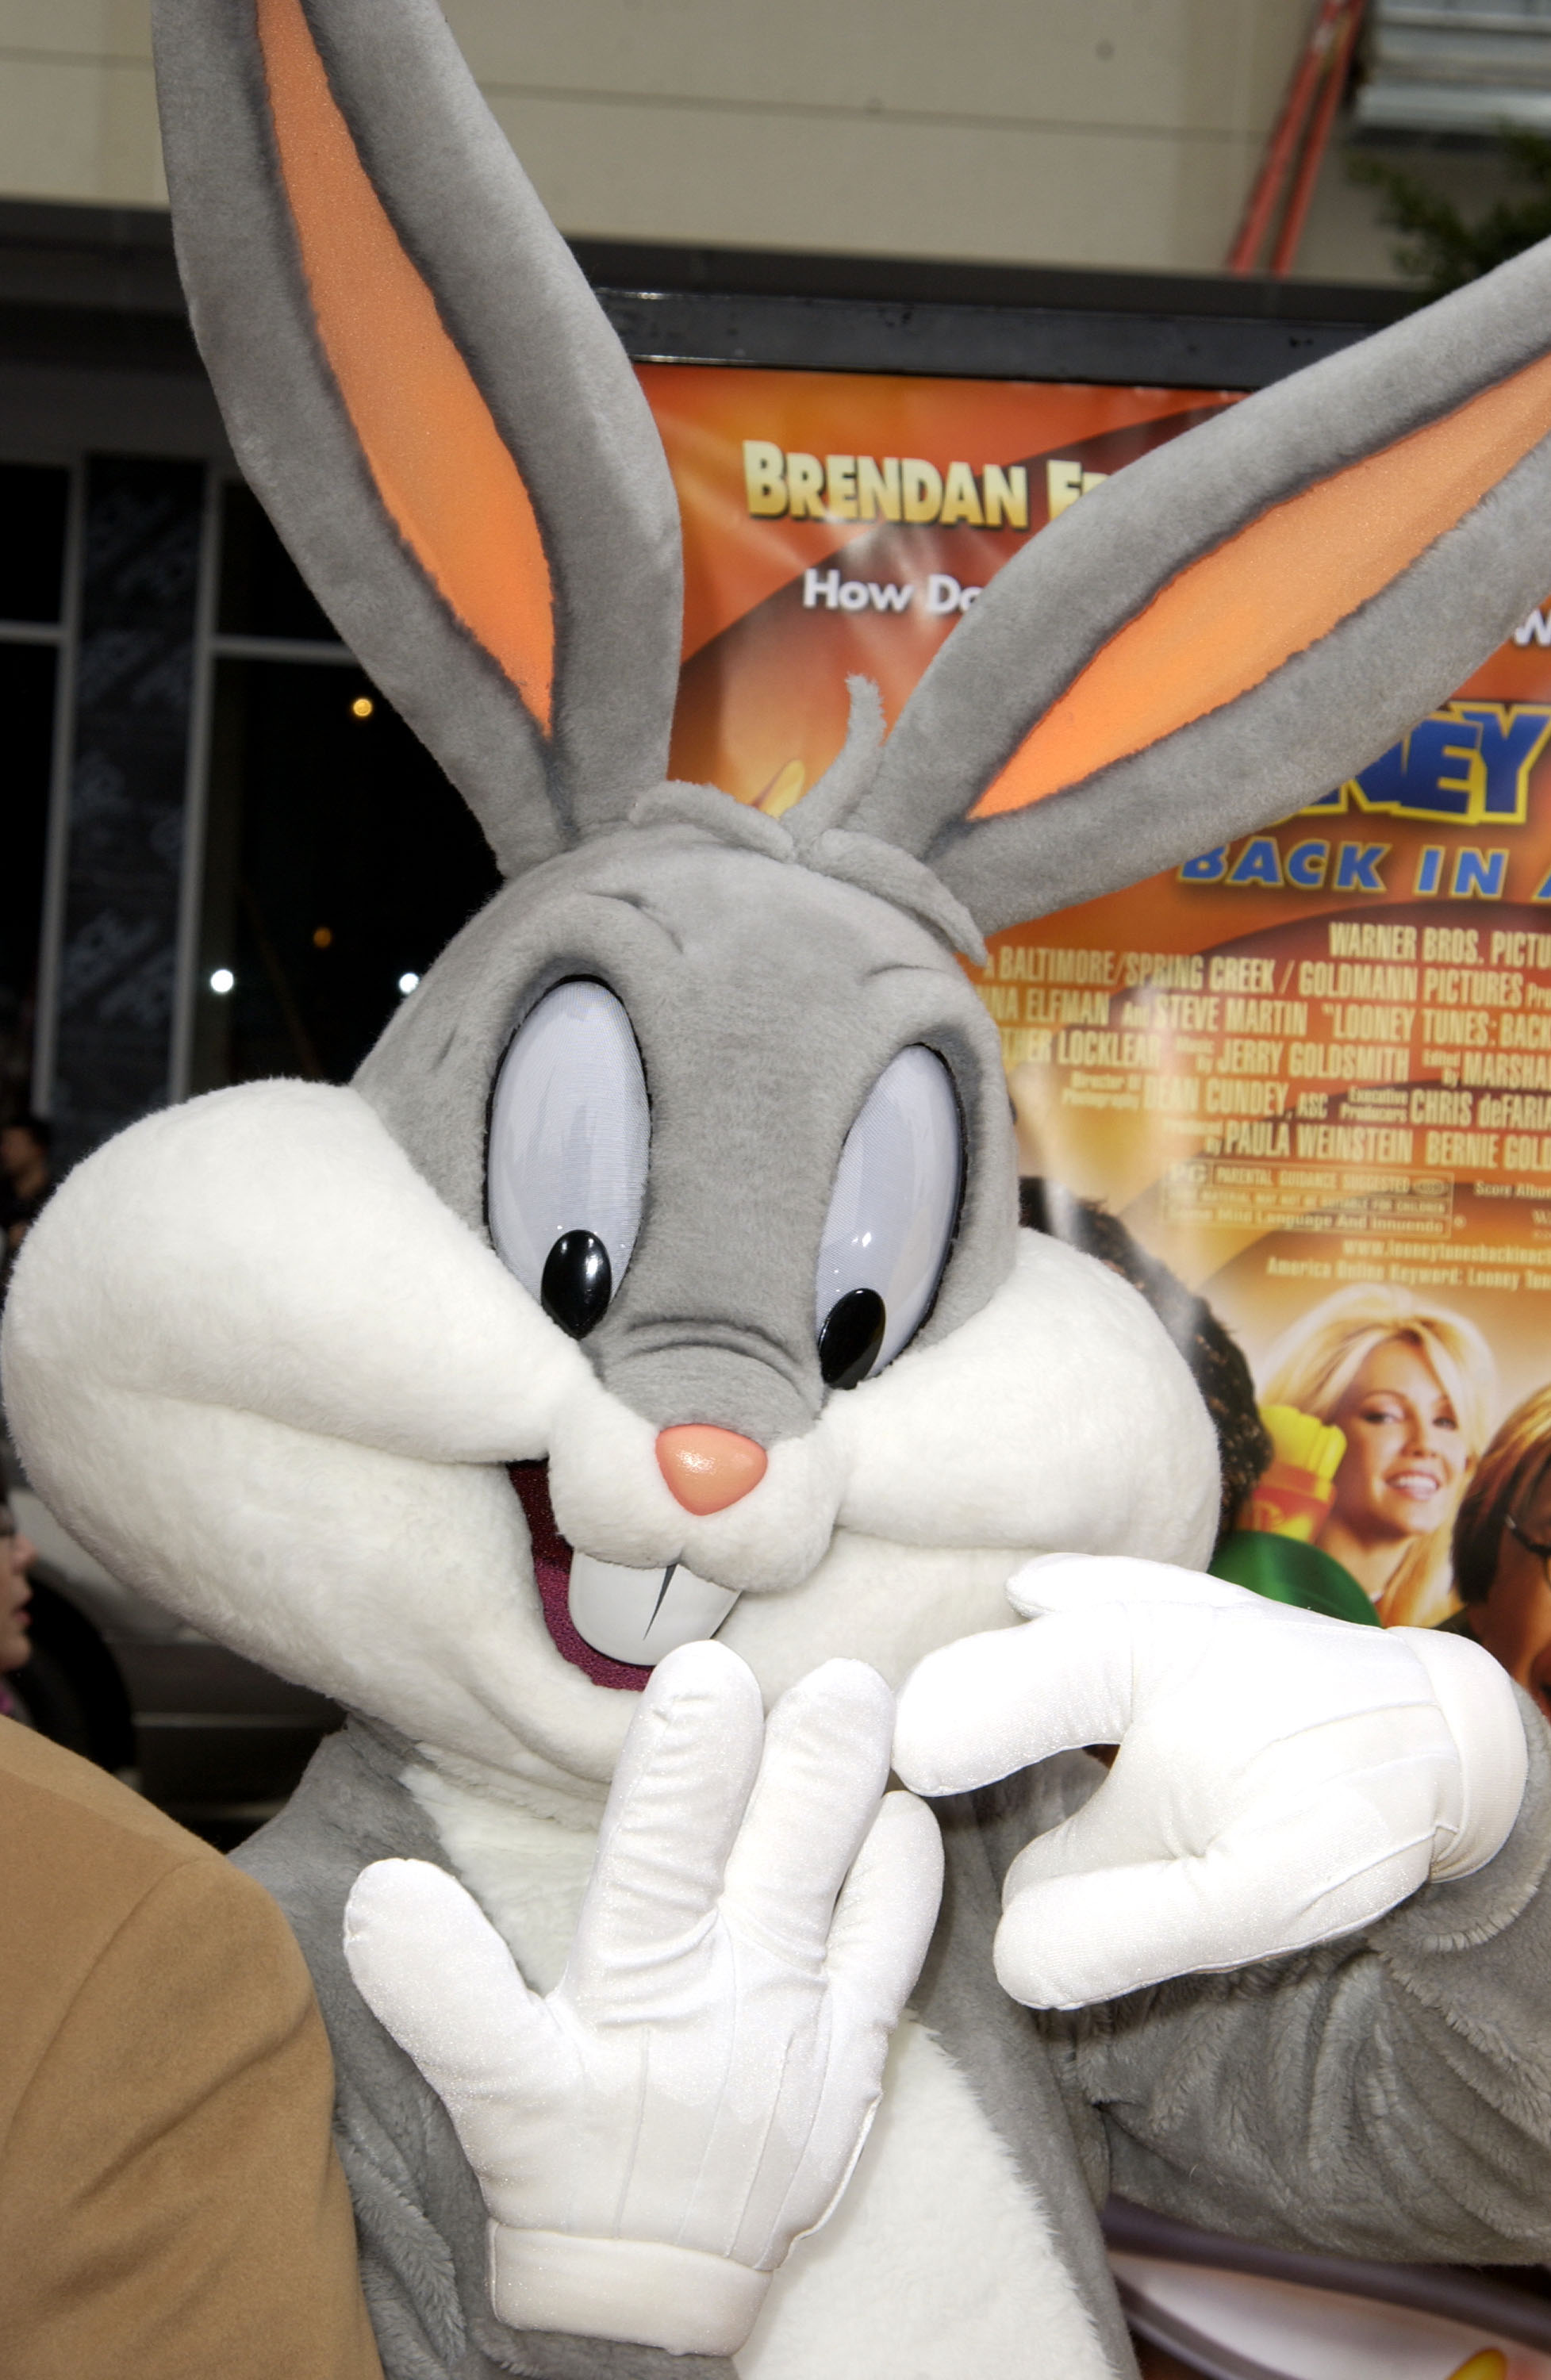 The World Premiere of “Looney Tunes: Back in Action”